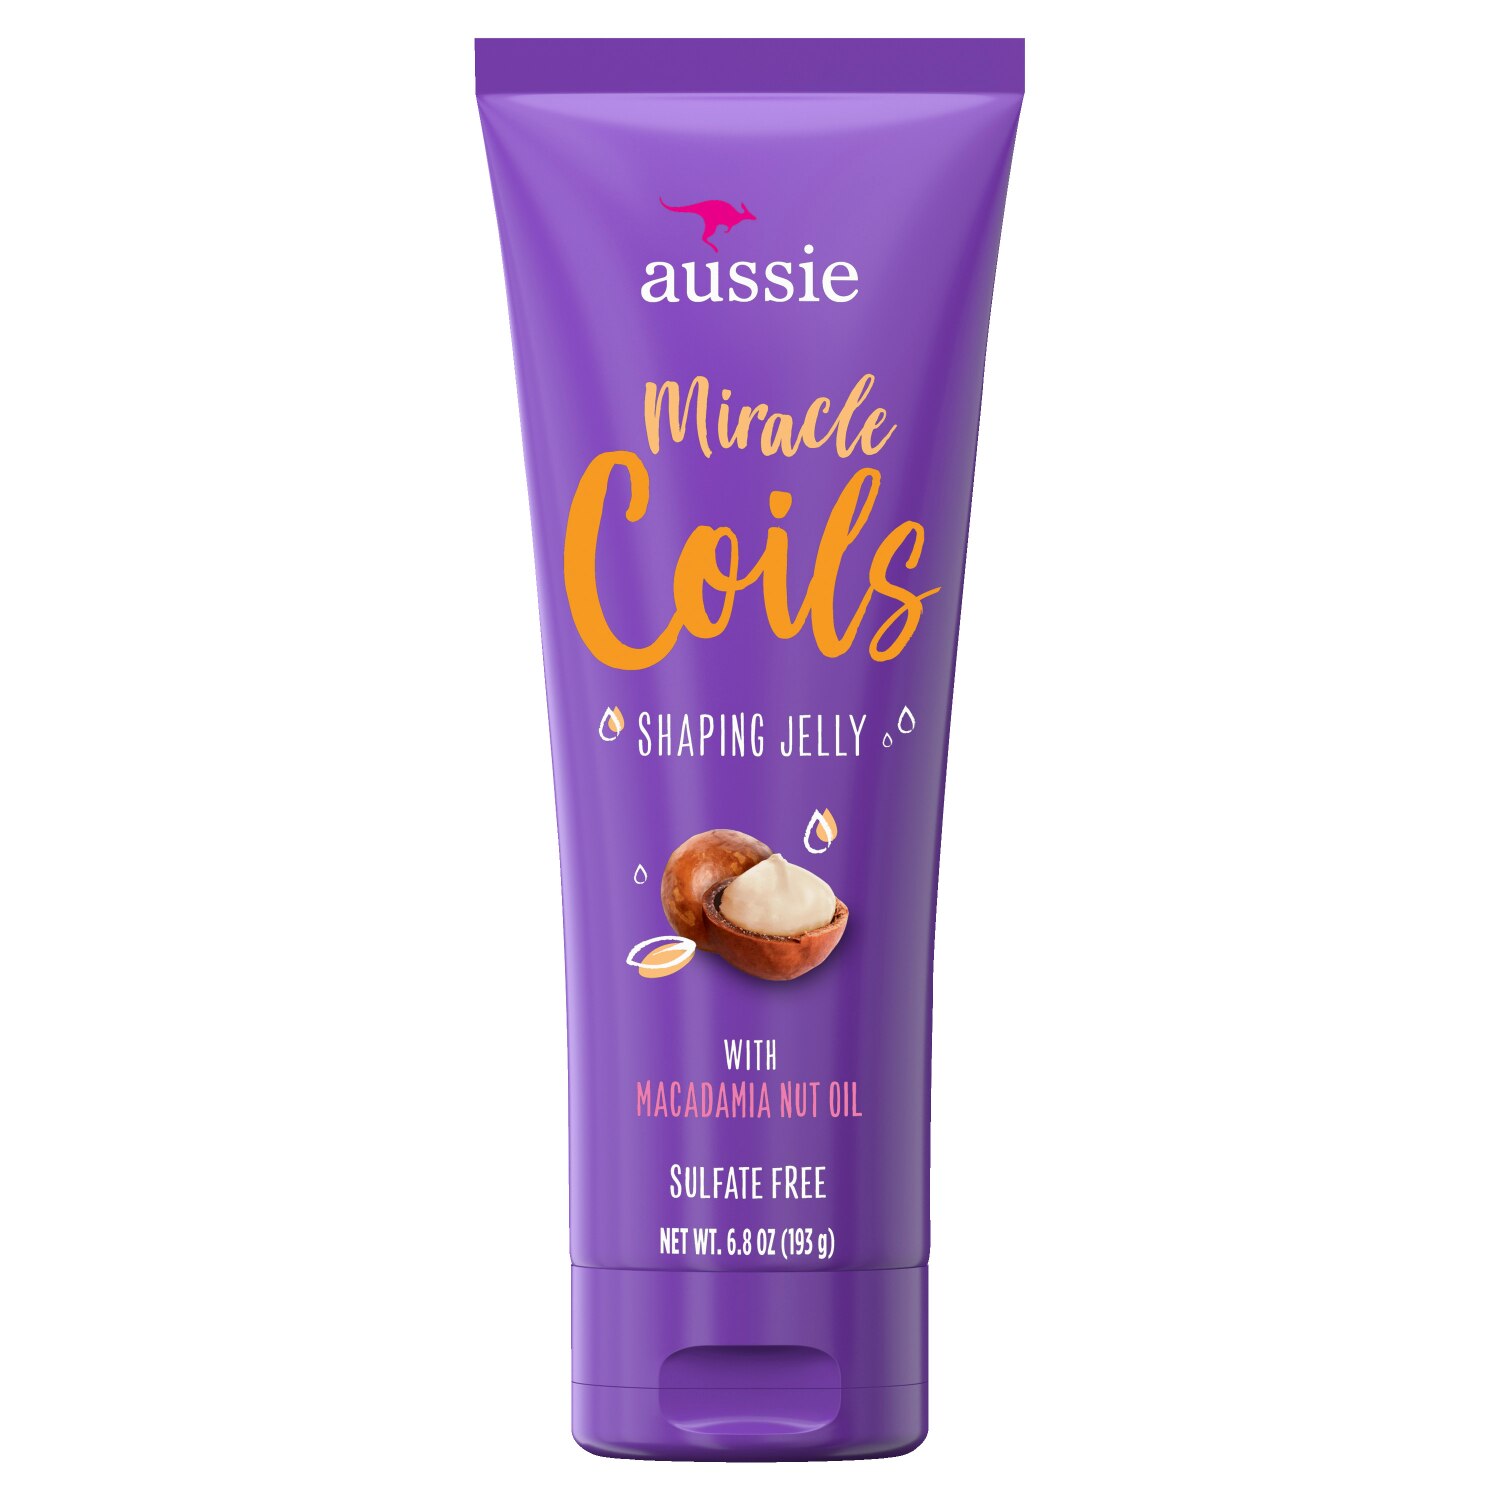 Aussie Miracle Coils Shaping Jelly, 6.8 Oz , CVS